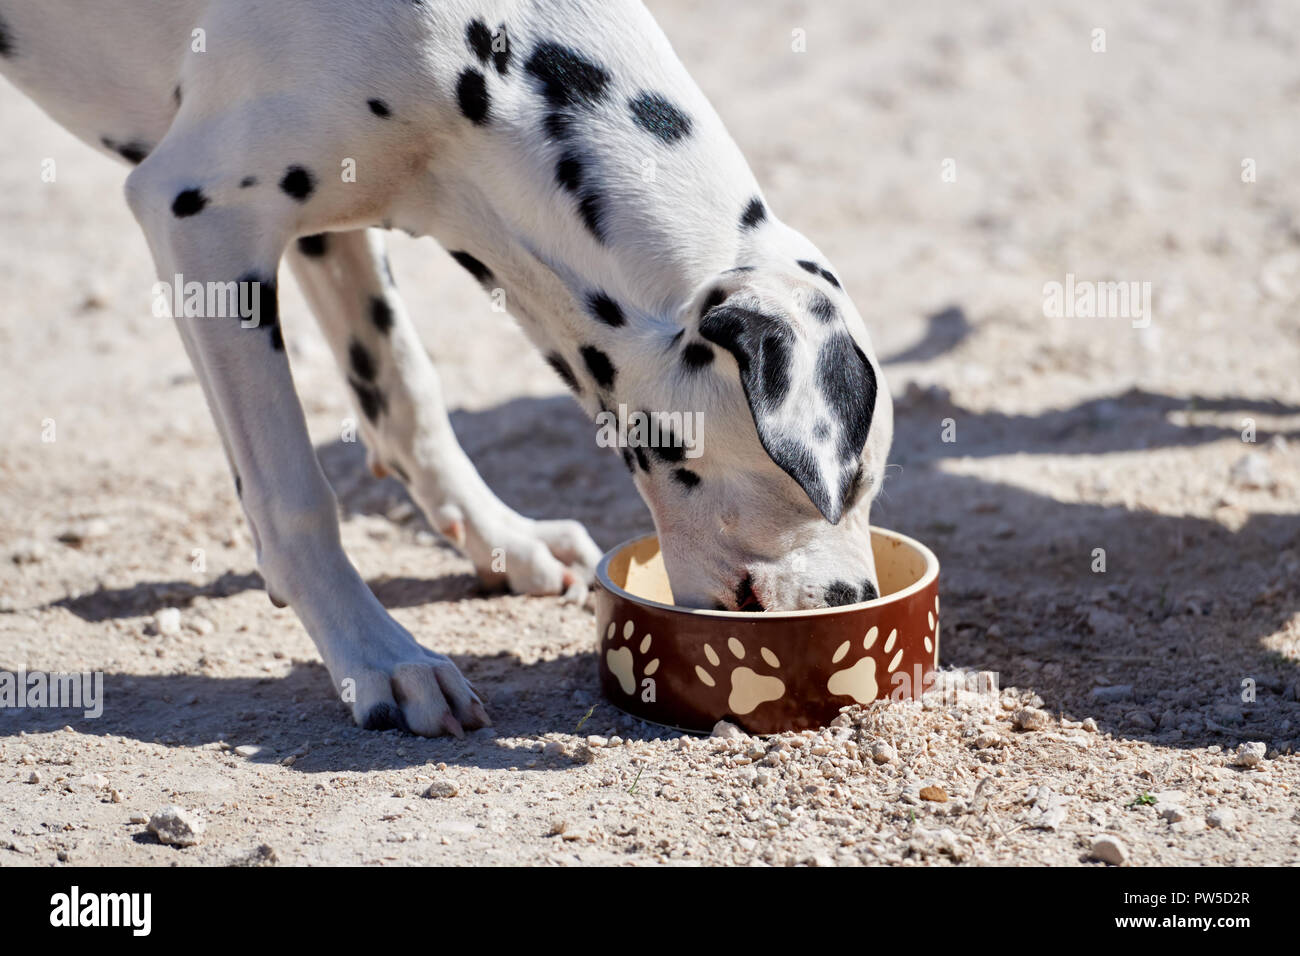 Dalmatian puppy eats dry food from a bowl Stock Photo